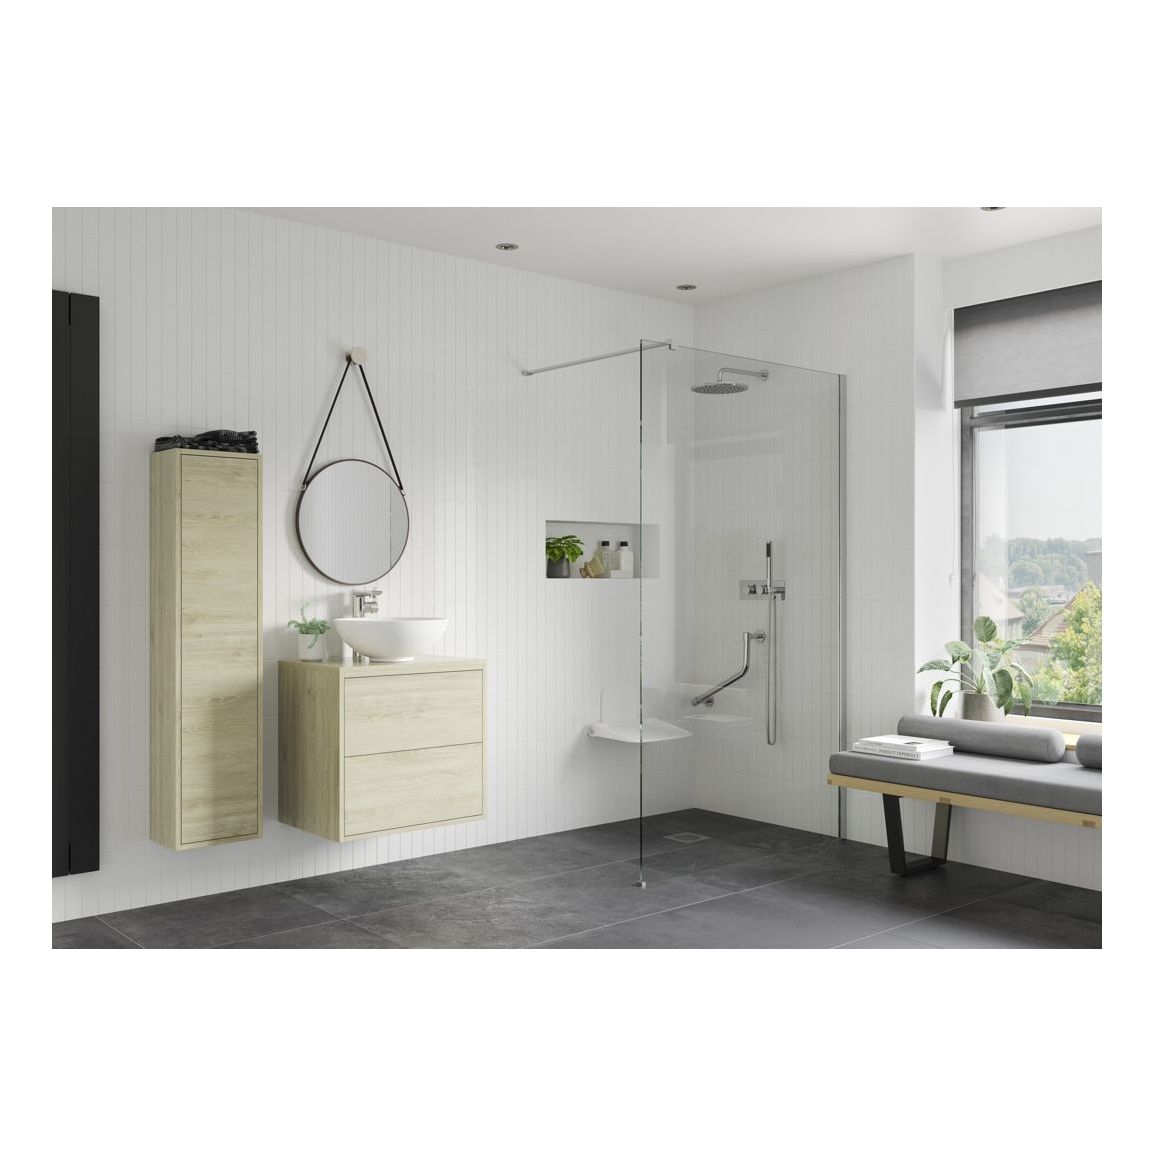 Montague 1000mm Wetroom Panel & Floor-to-Ceiling Pole - Chrome